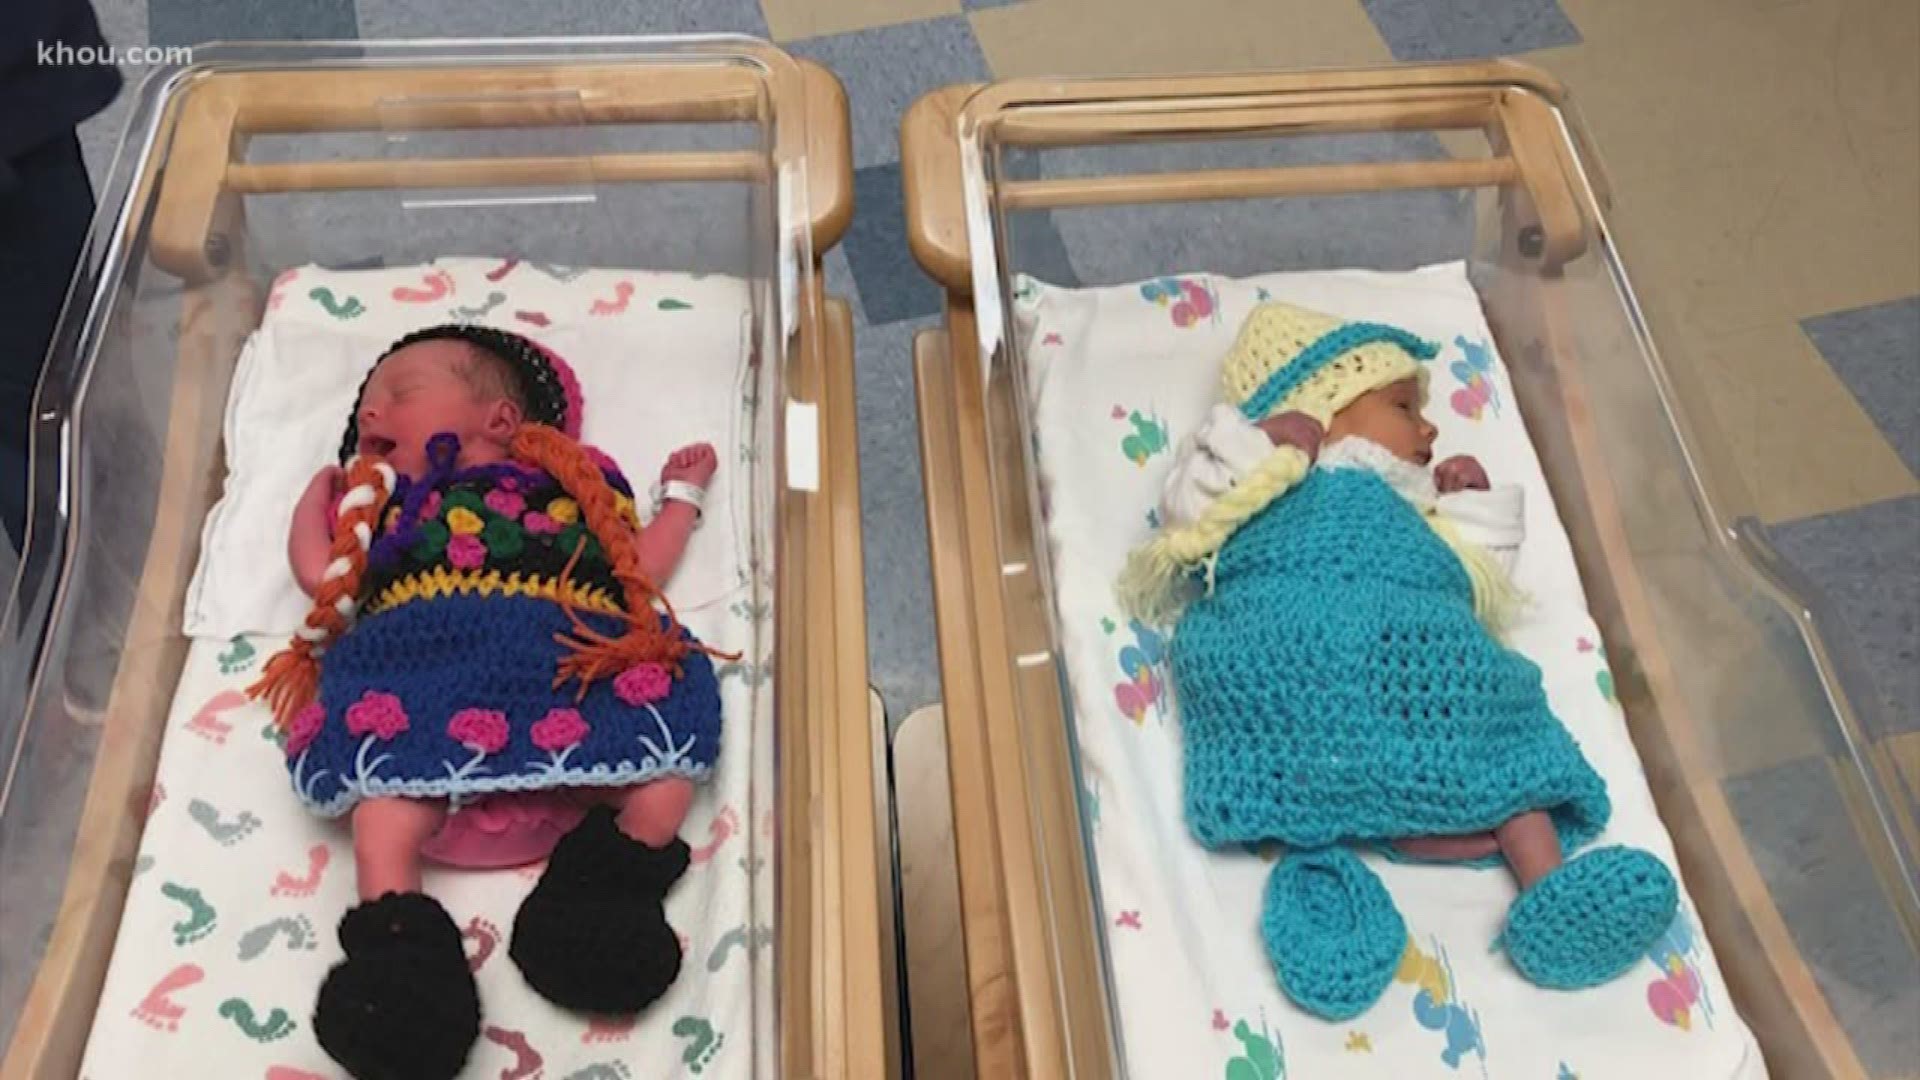 A hospital in Kansas shared photos of newborns dressed as characters from the movie "Frozen 2."